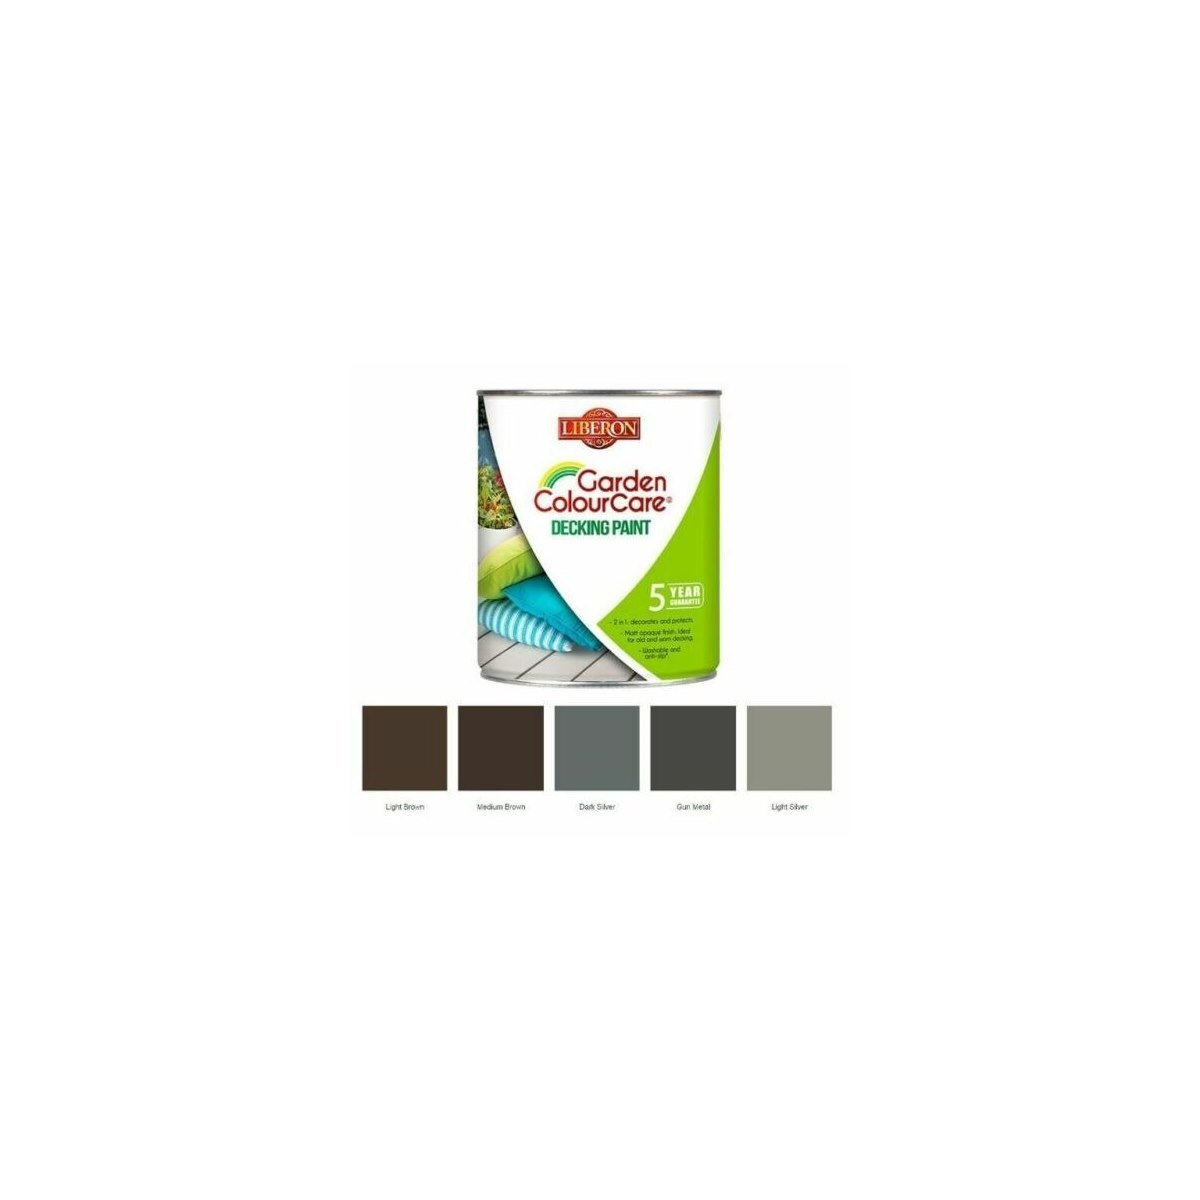 Where to Buy Liberon Decking Paint